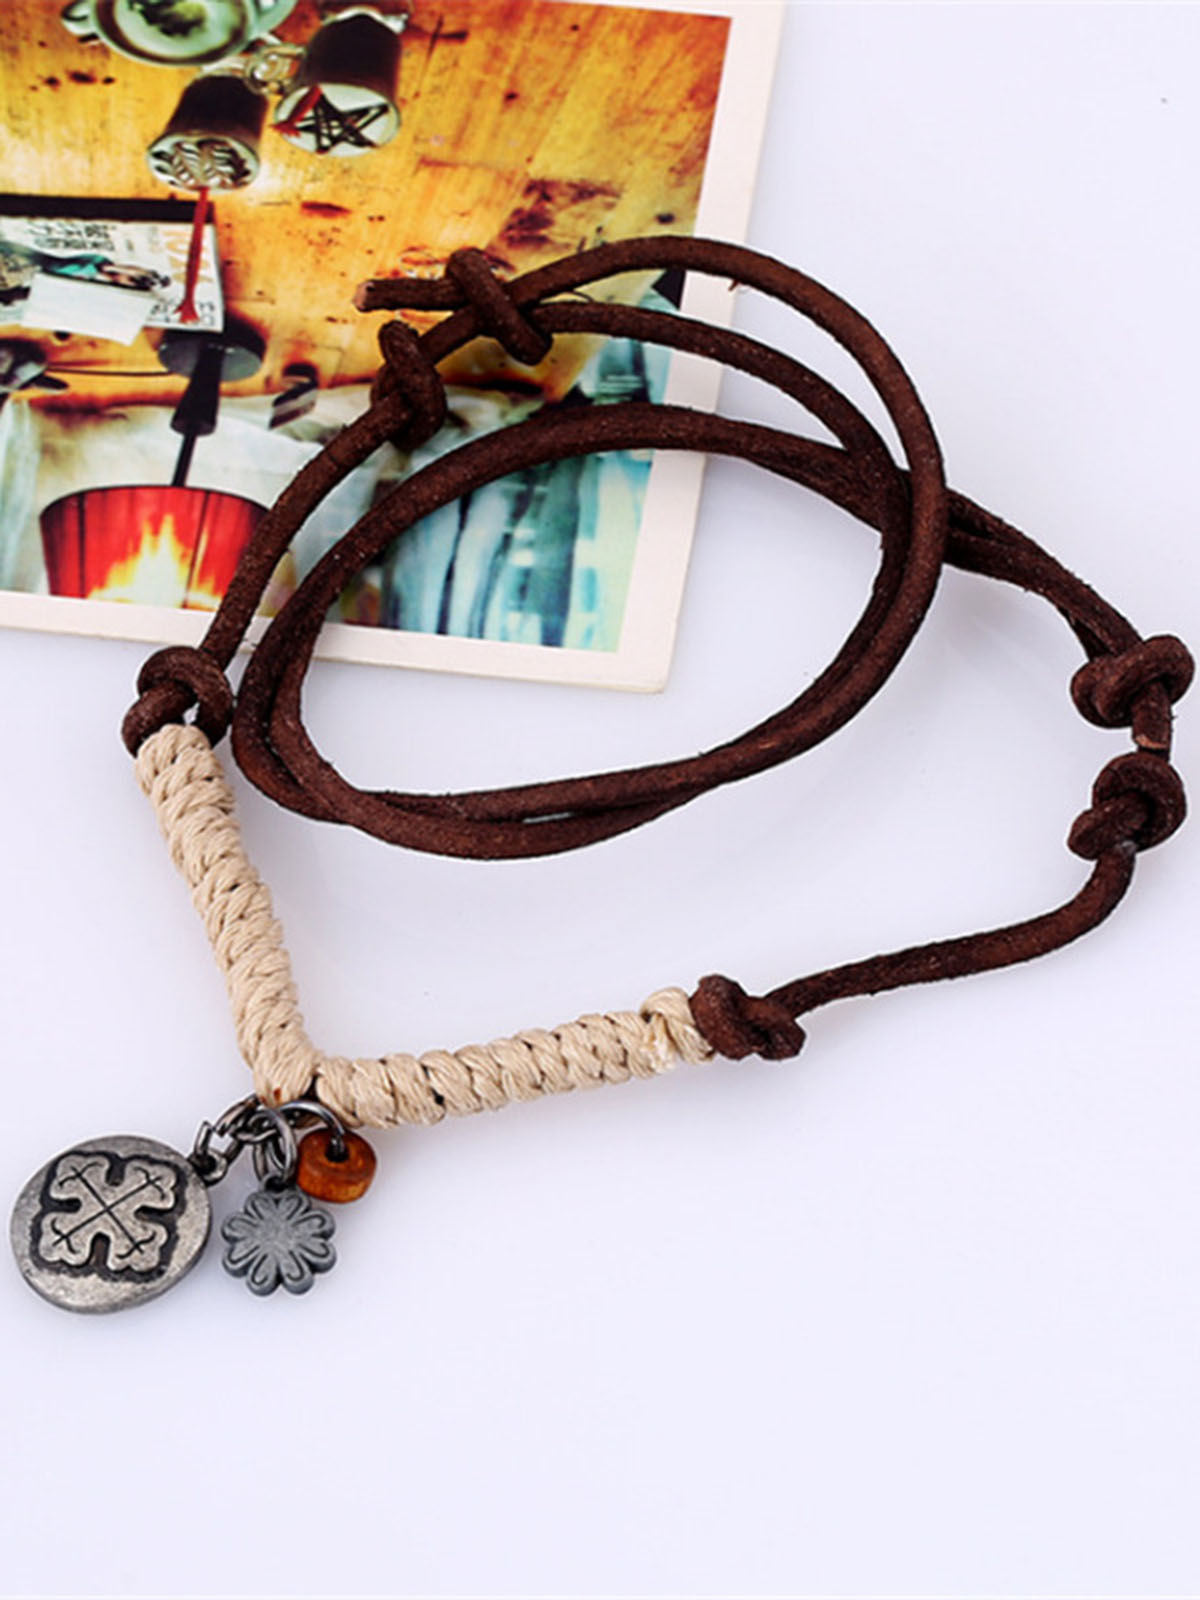 

JFN Men's Hemp Rope Braided Vintage Alloy Necklace, As picture, Men's Accessories